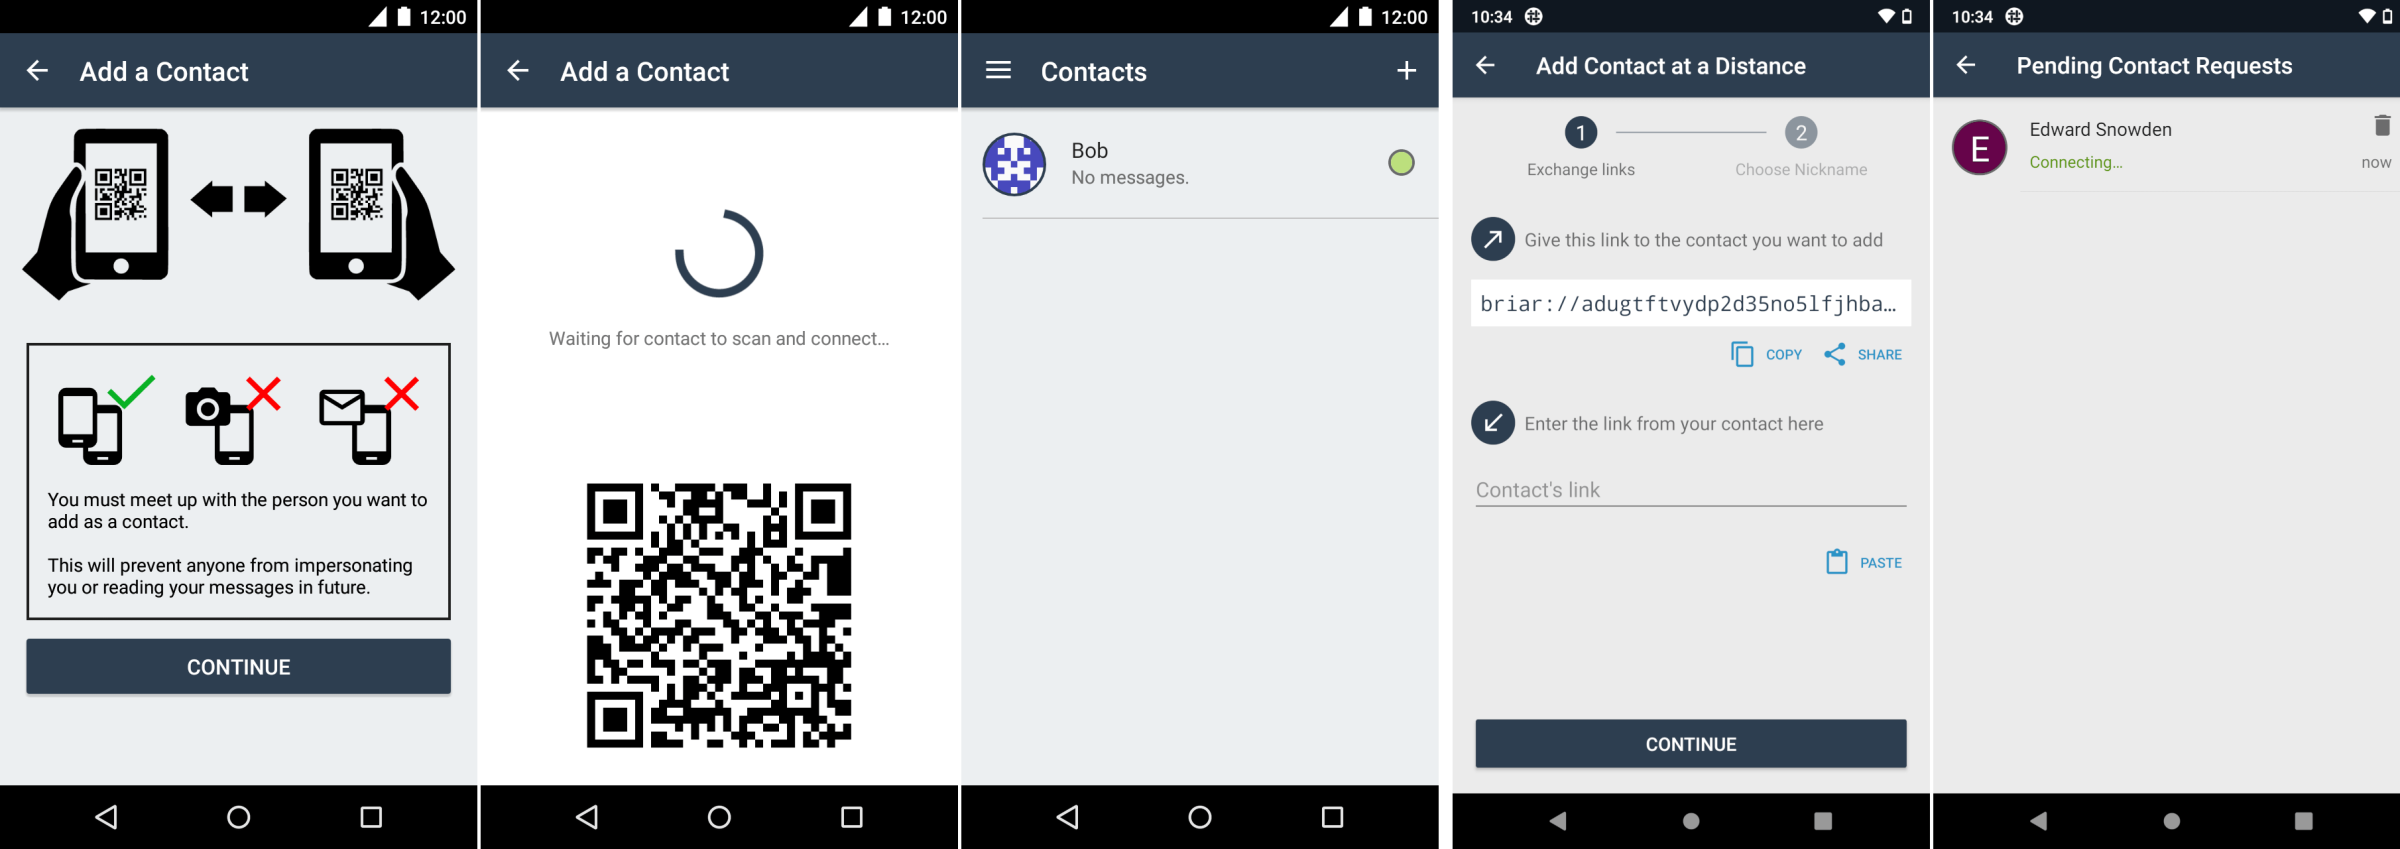 Briar has two ways of adding contacts. Adding a nearby contact will require both users to scan a QR code from the other person’s screen. Adding a contact at a distance will require you to copy the Briar link and send it to the person you want to add